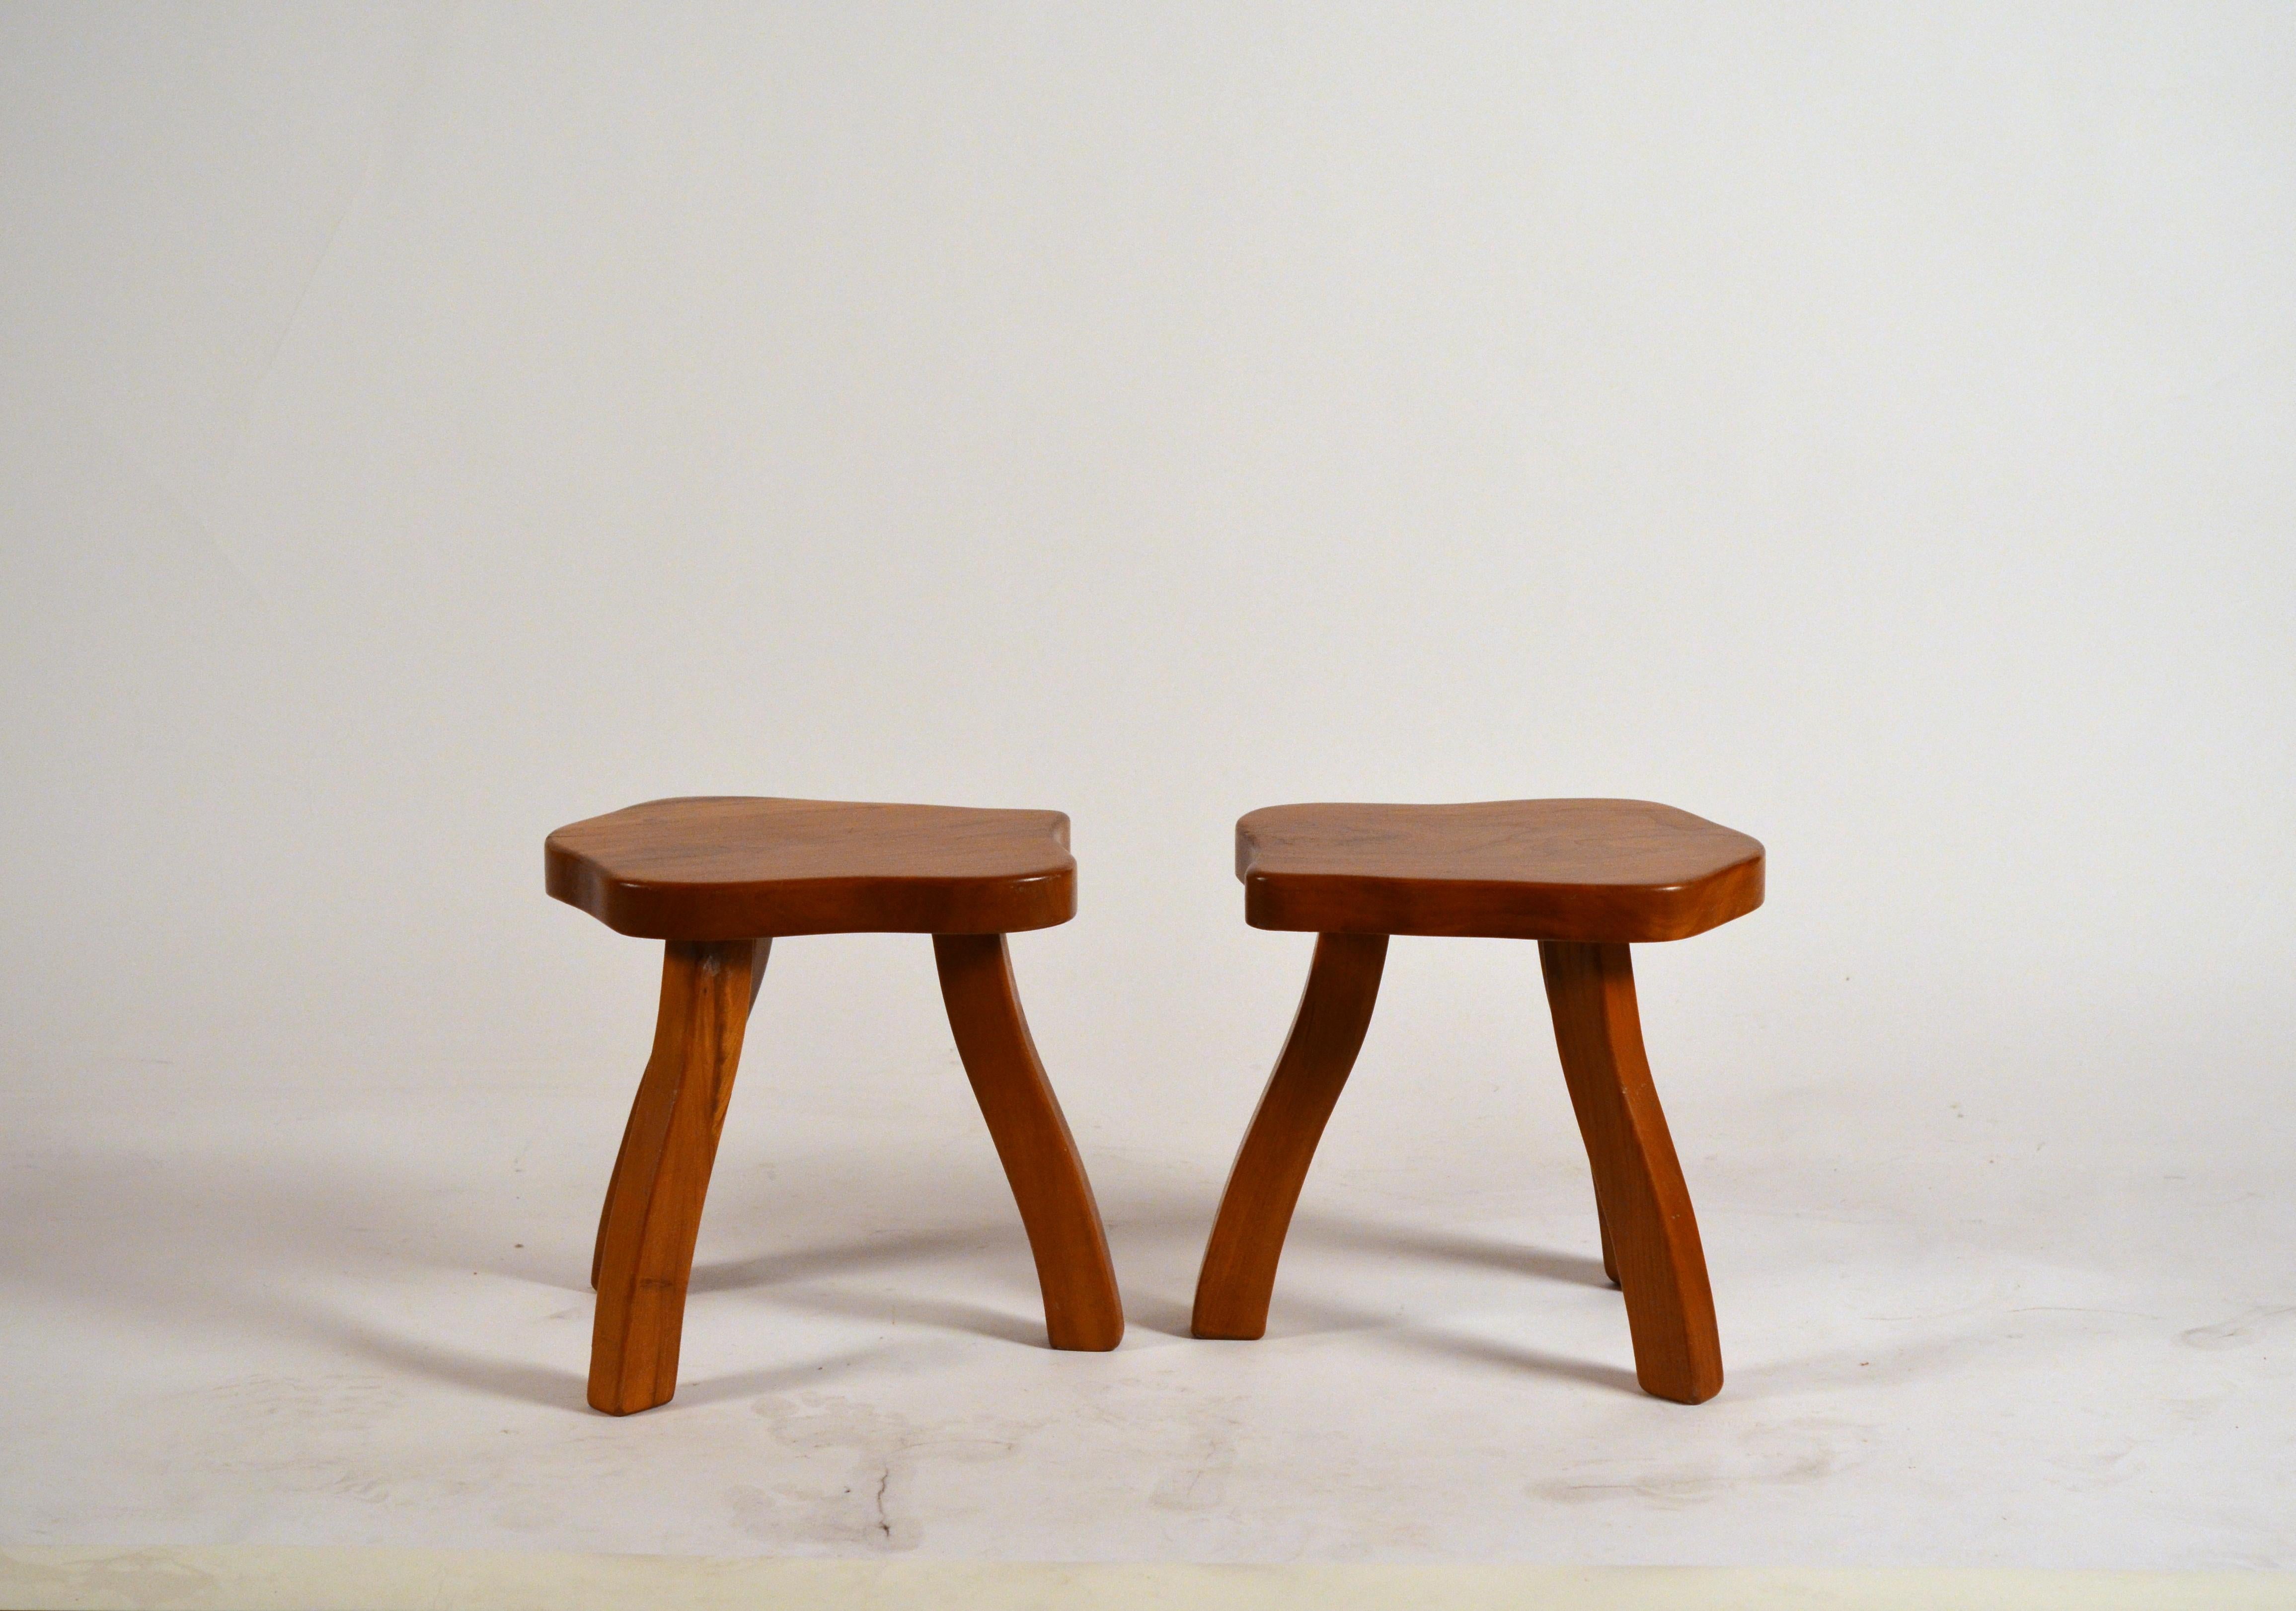 Organic Modern Pair of Polished Walnut Tripod Stools in the Style of Charlotte Perriand